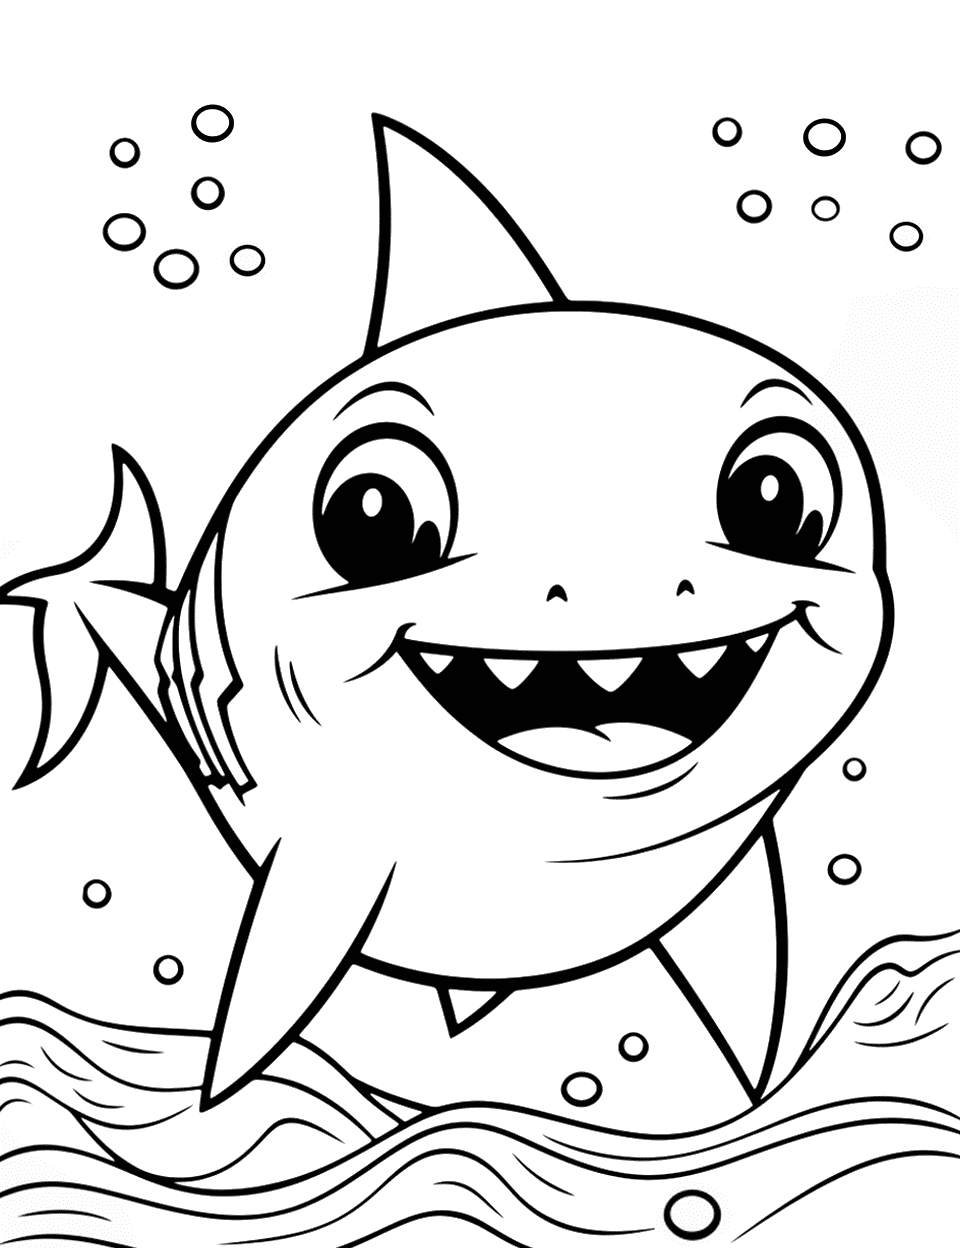 Happy Baby Shark Coloring Page - Baby Shark swimming happily in the ocean.